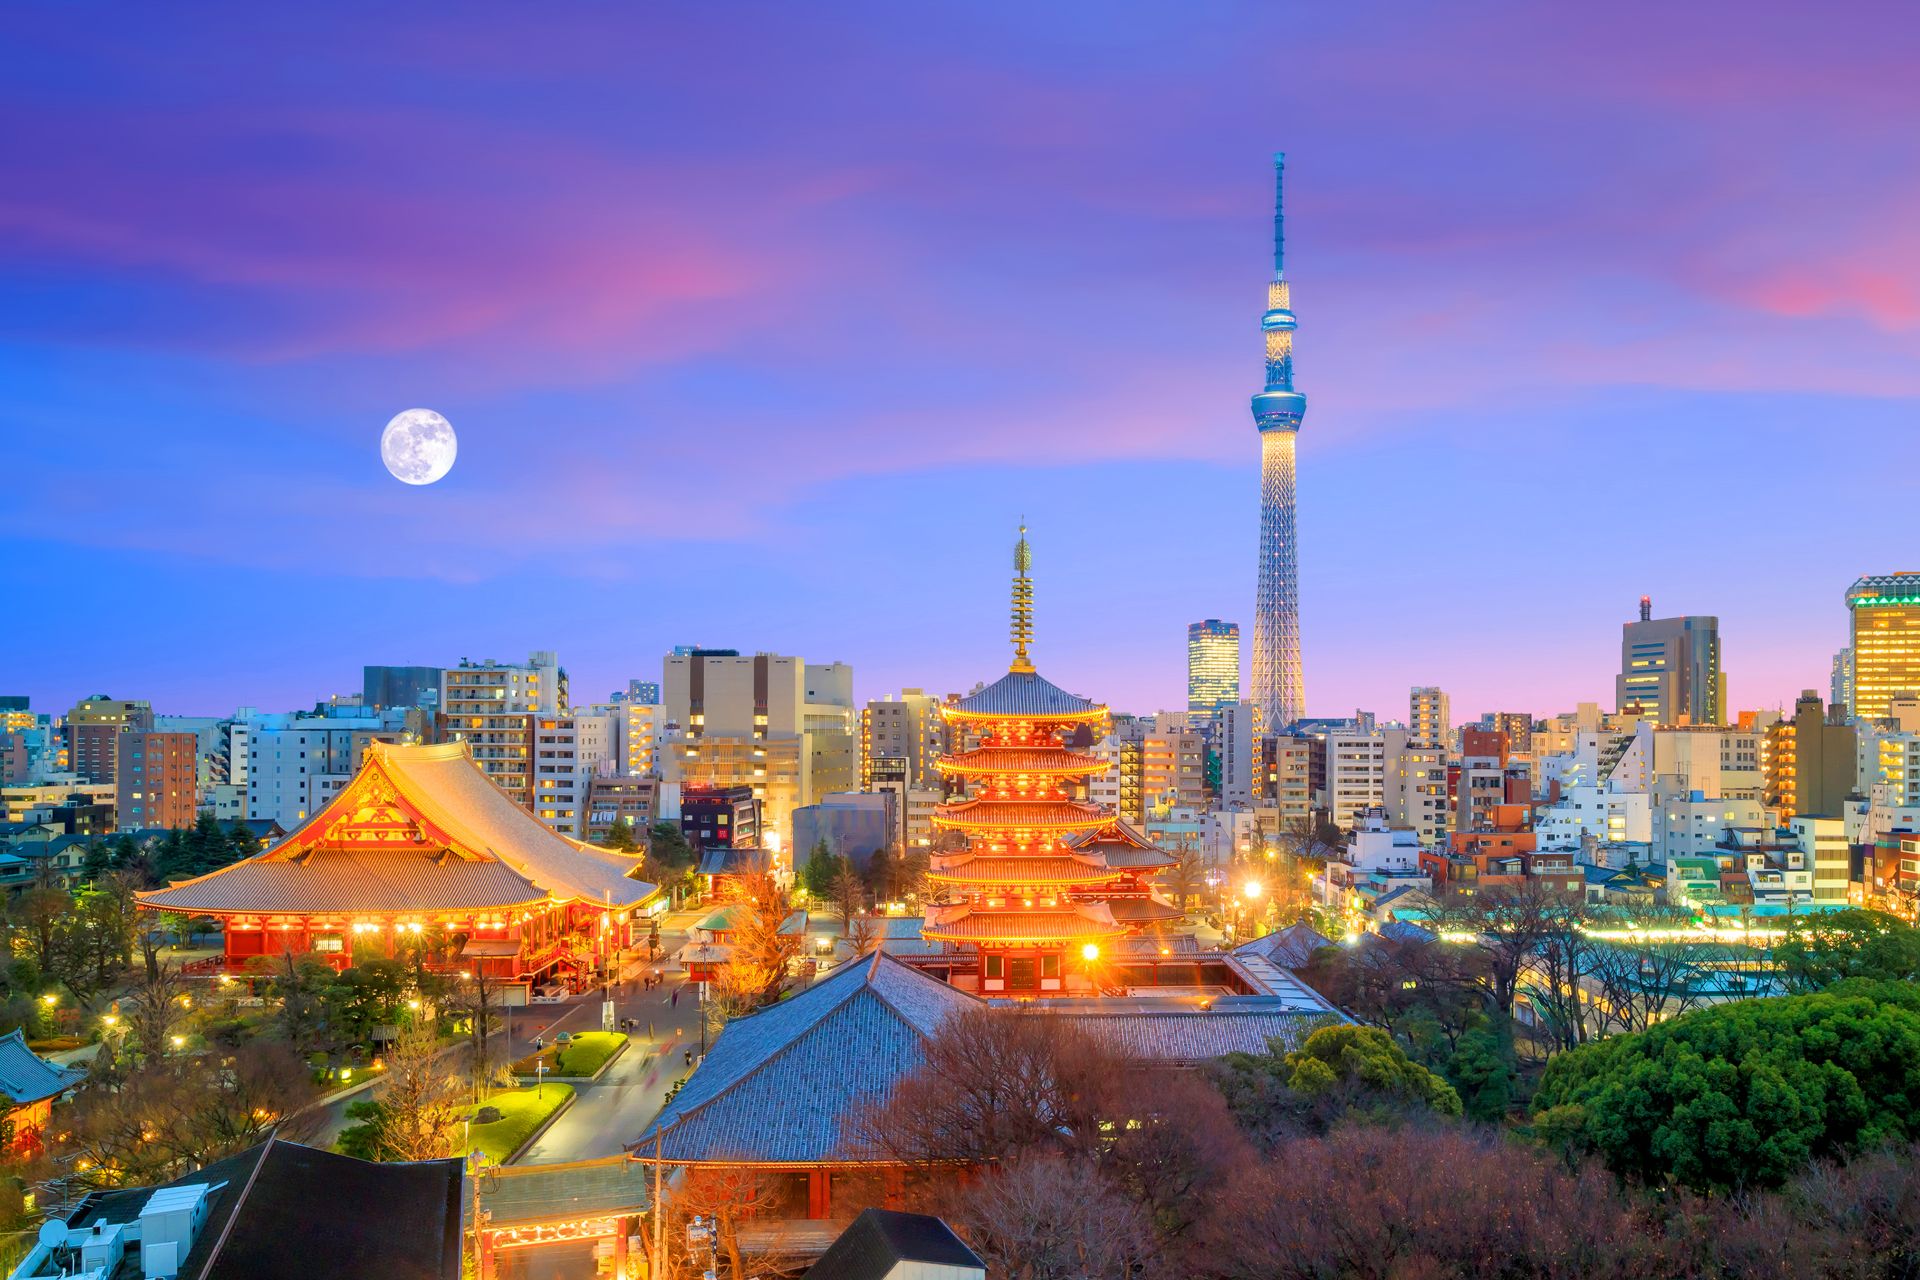 View of the Tokyo skyline with Senso-ji Temple and the Tokyo Sky Tree